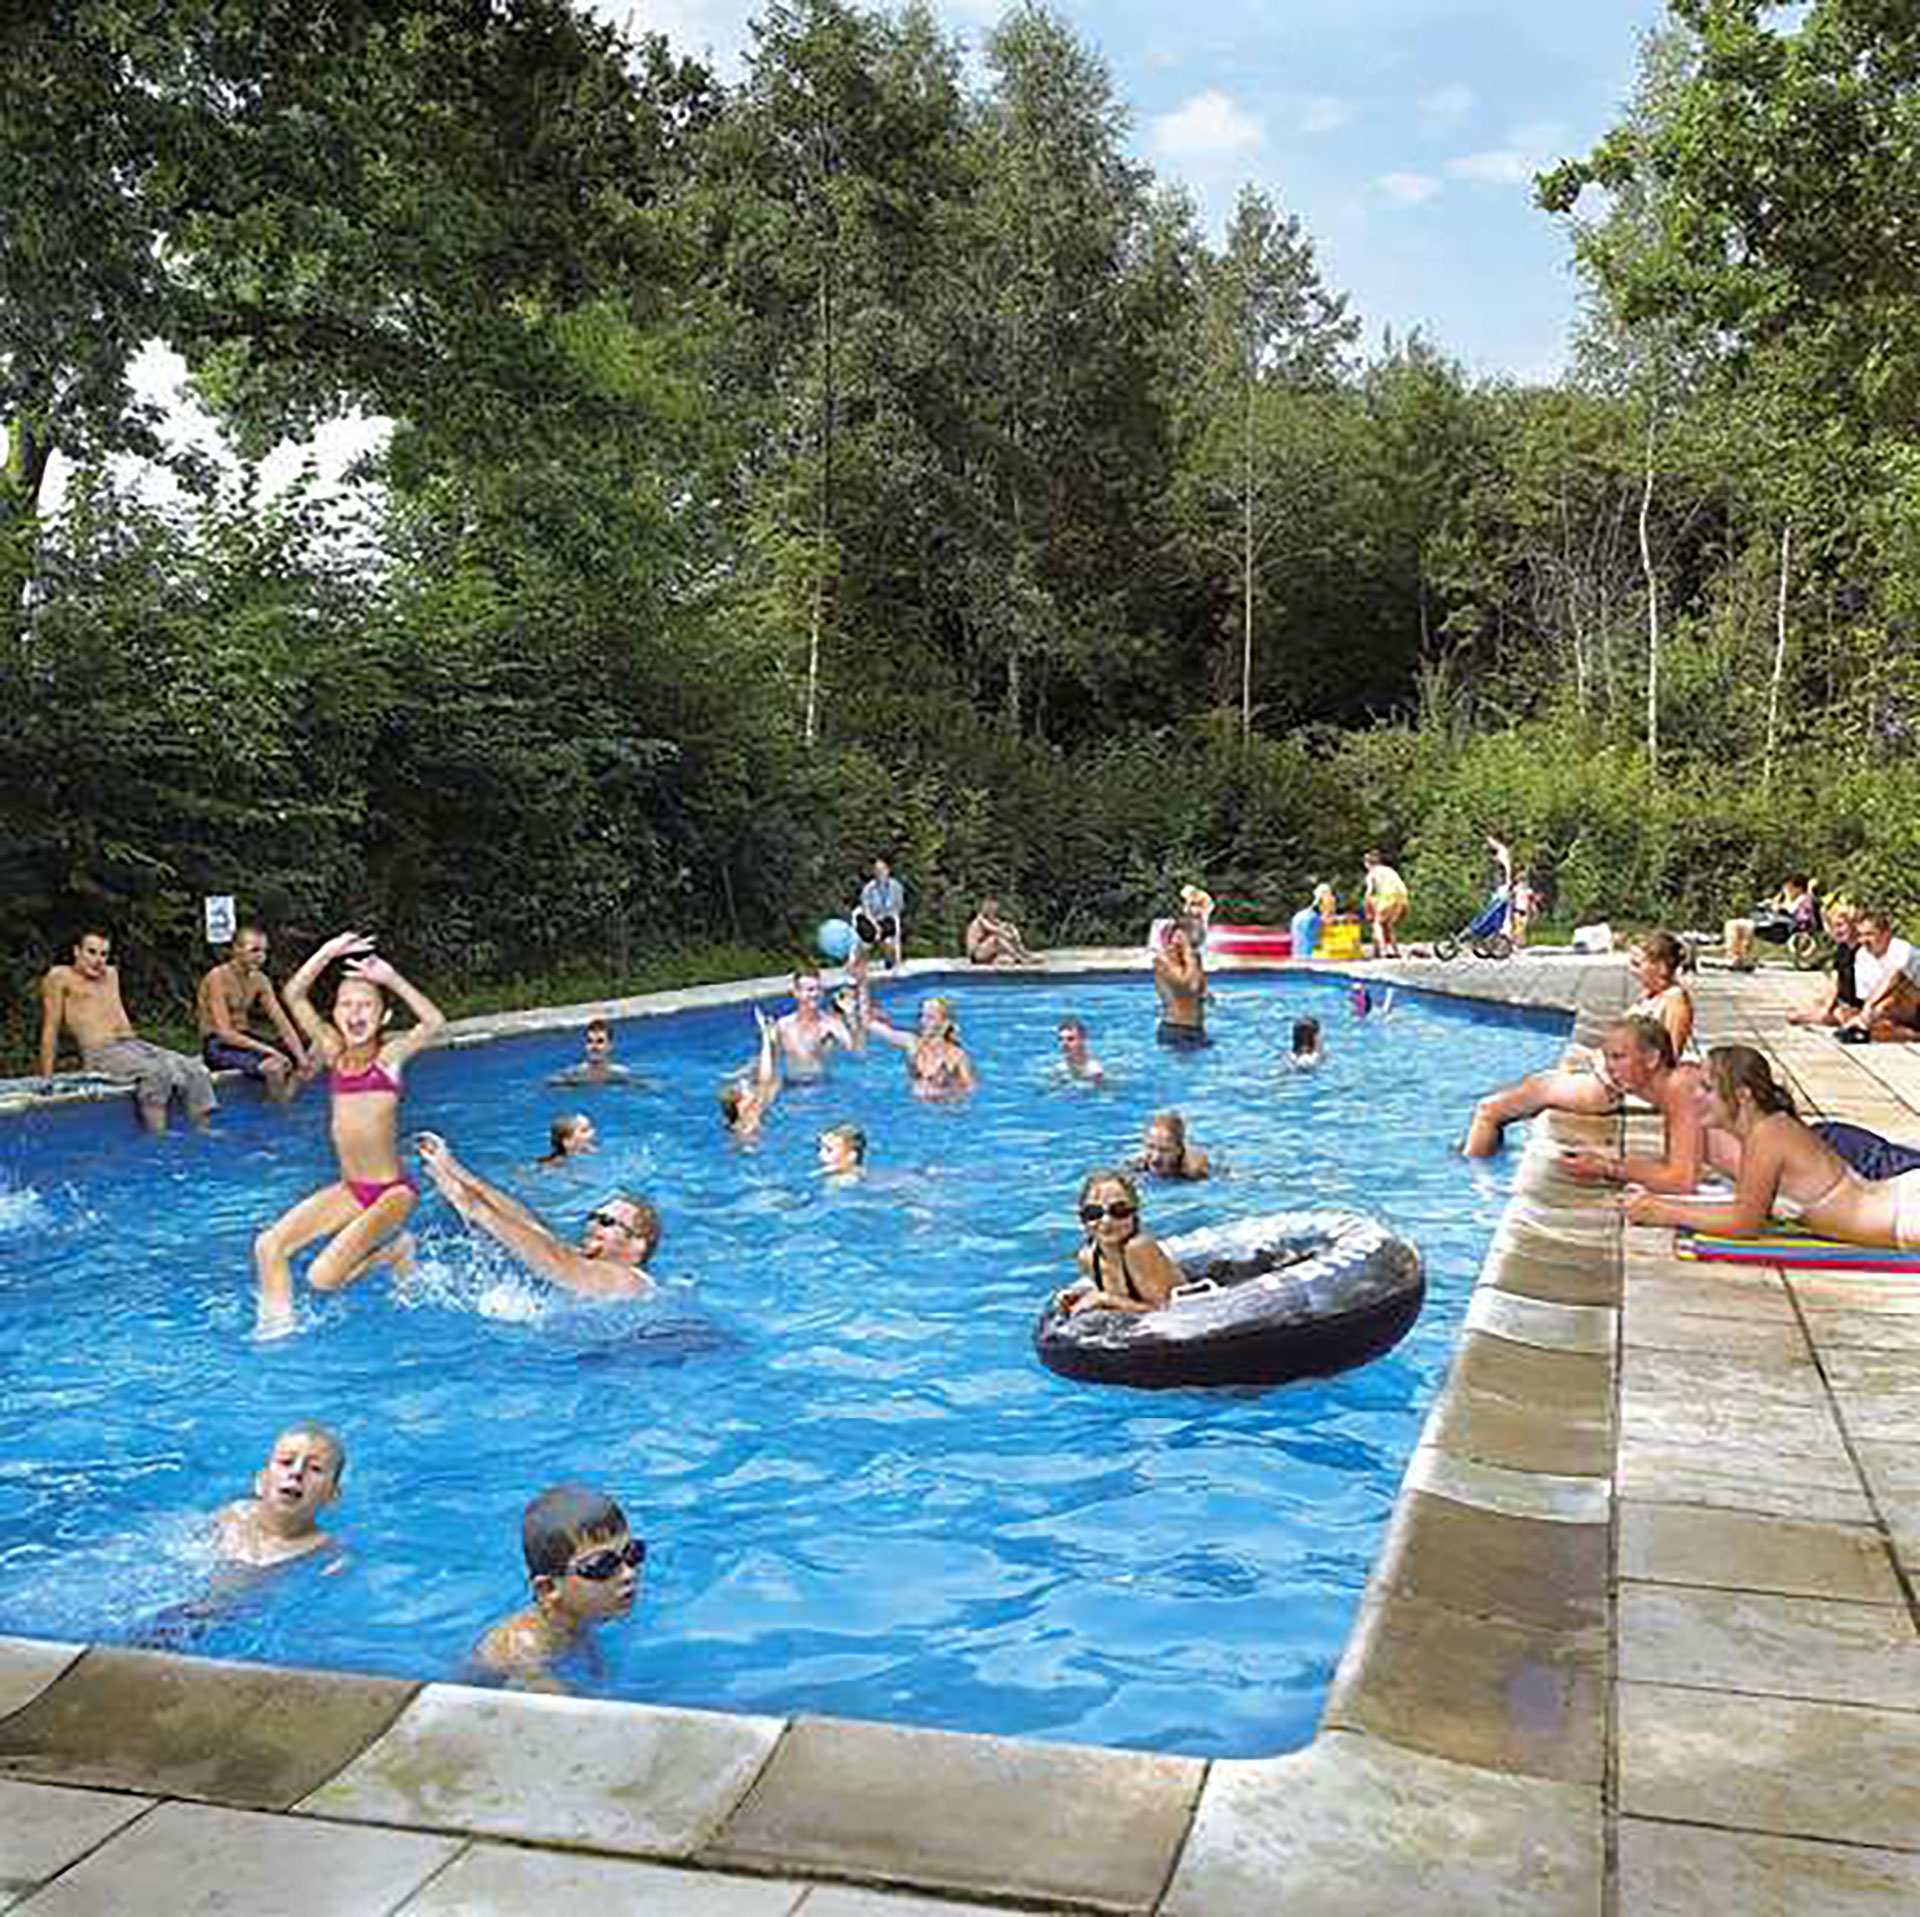 Camping touristique - Chênefleur - Tintigny - emplacements spacieux - sanitaires - piscine - restaurant - magasin - animation